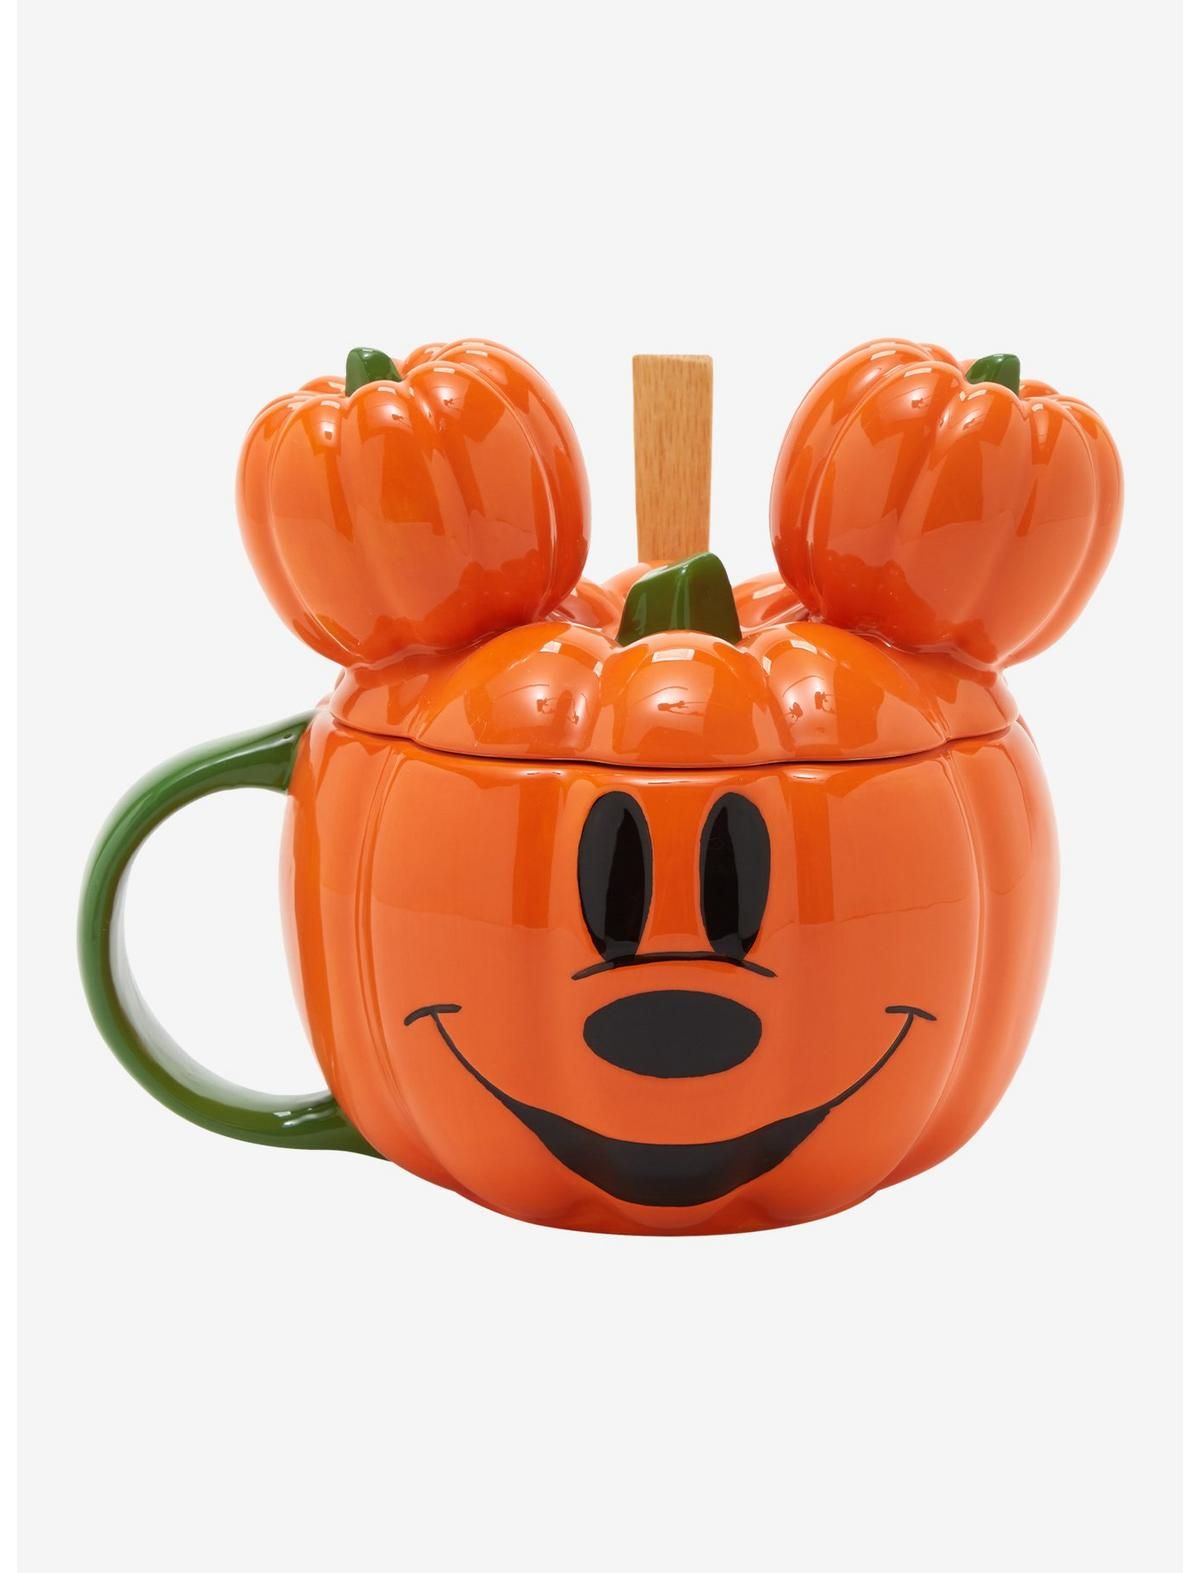 Disney Mickey Mouse Pumpkin Mug With Lid & Spoon Hot Topic Exclusive | Hot Topic | Hot Topic